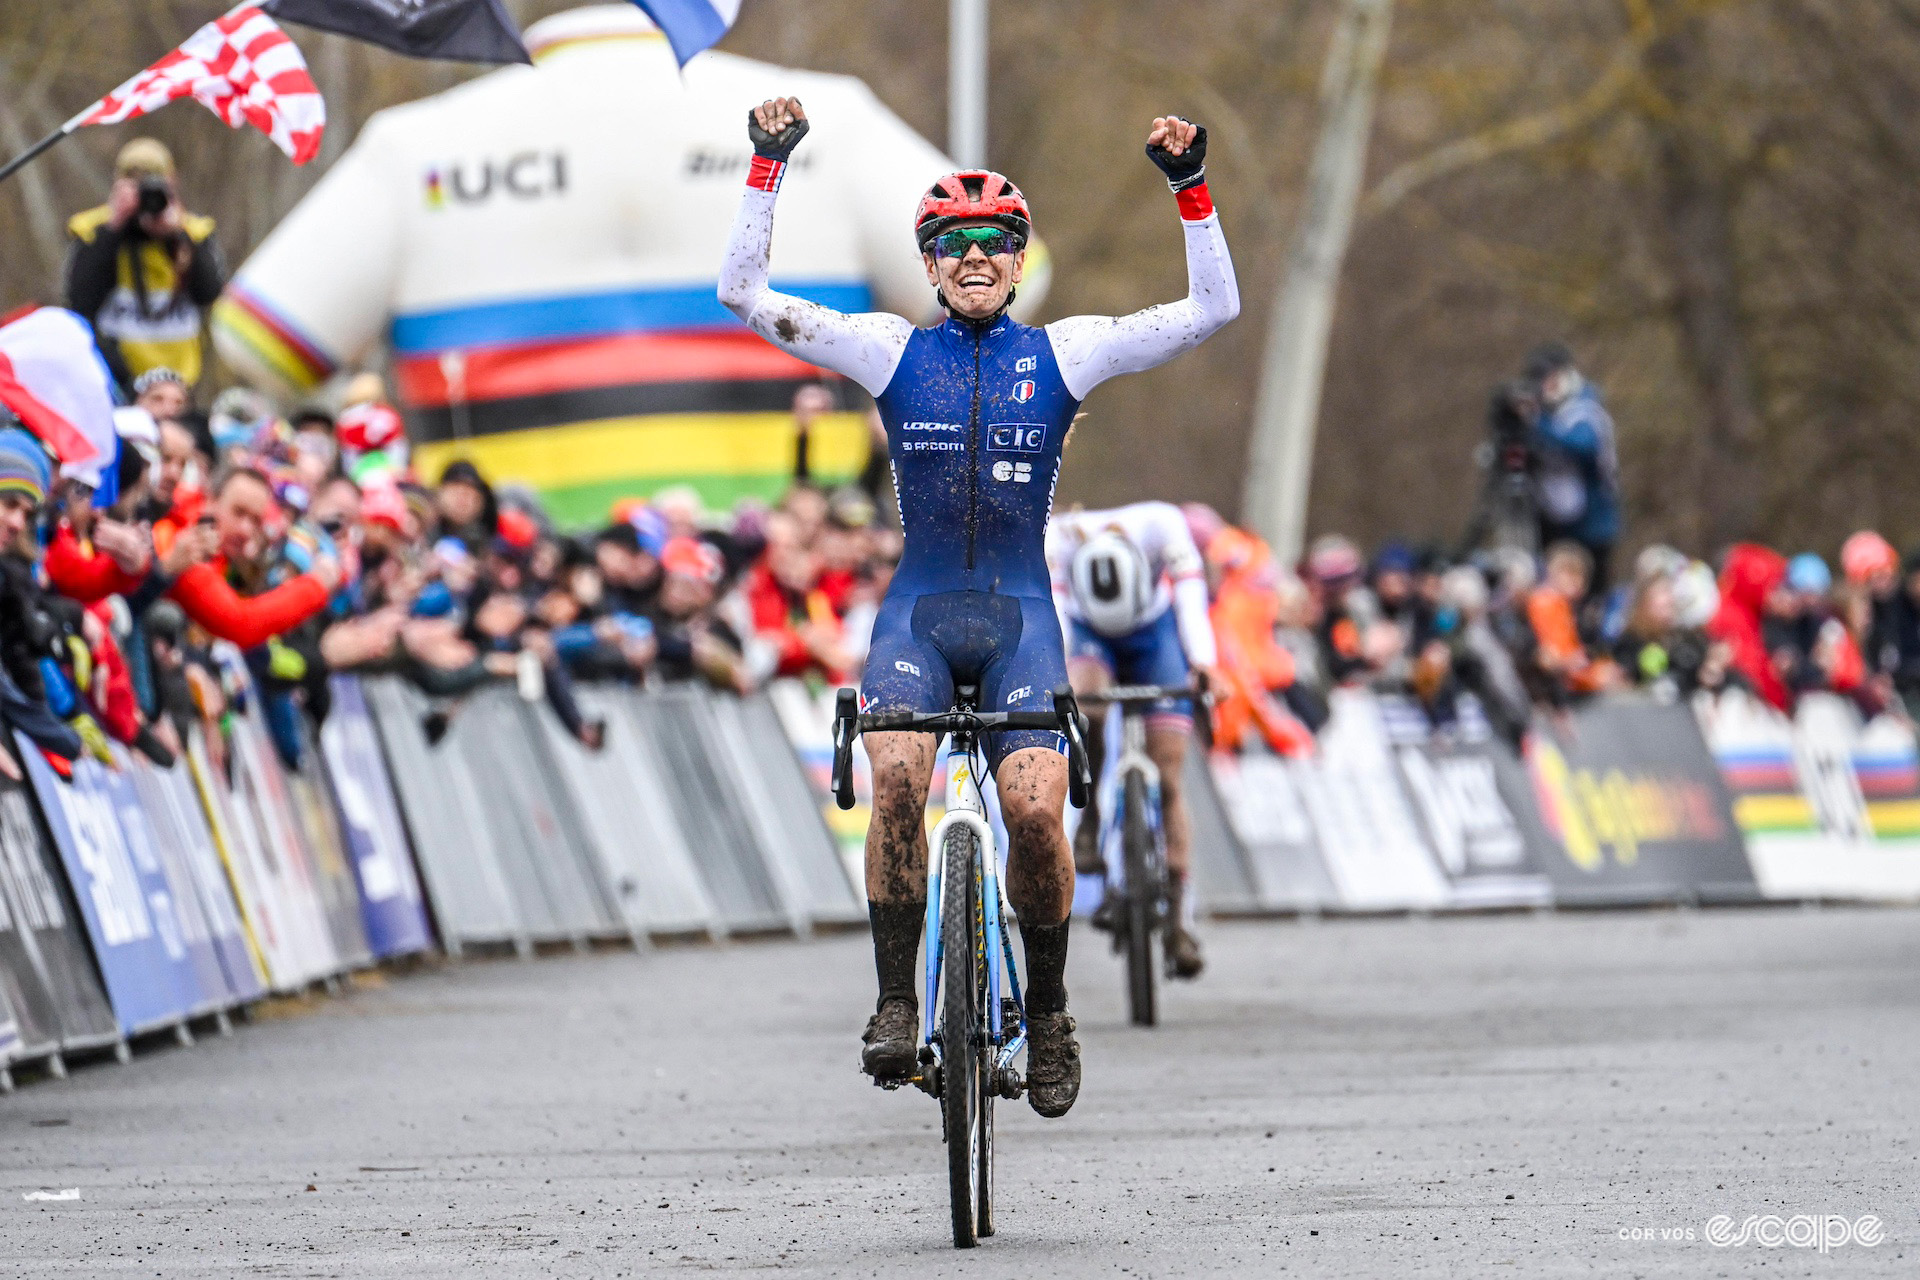 French rider Célia Gery celebrates winning the junior women's title ahead of Britain's Cat Ferguson during the UCI Cyclo-Cross World Championships in Tábor.